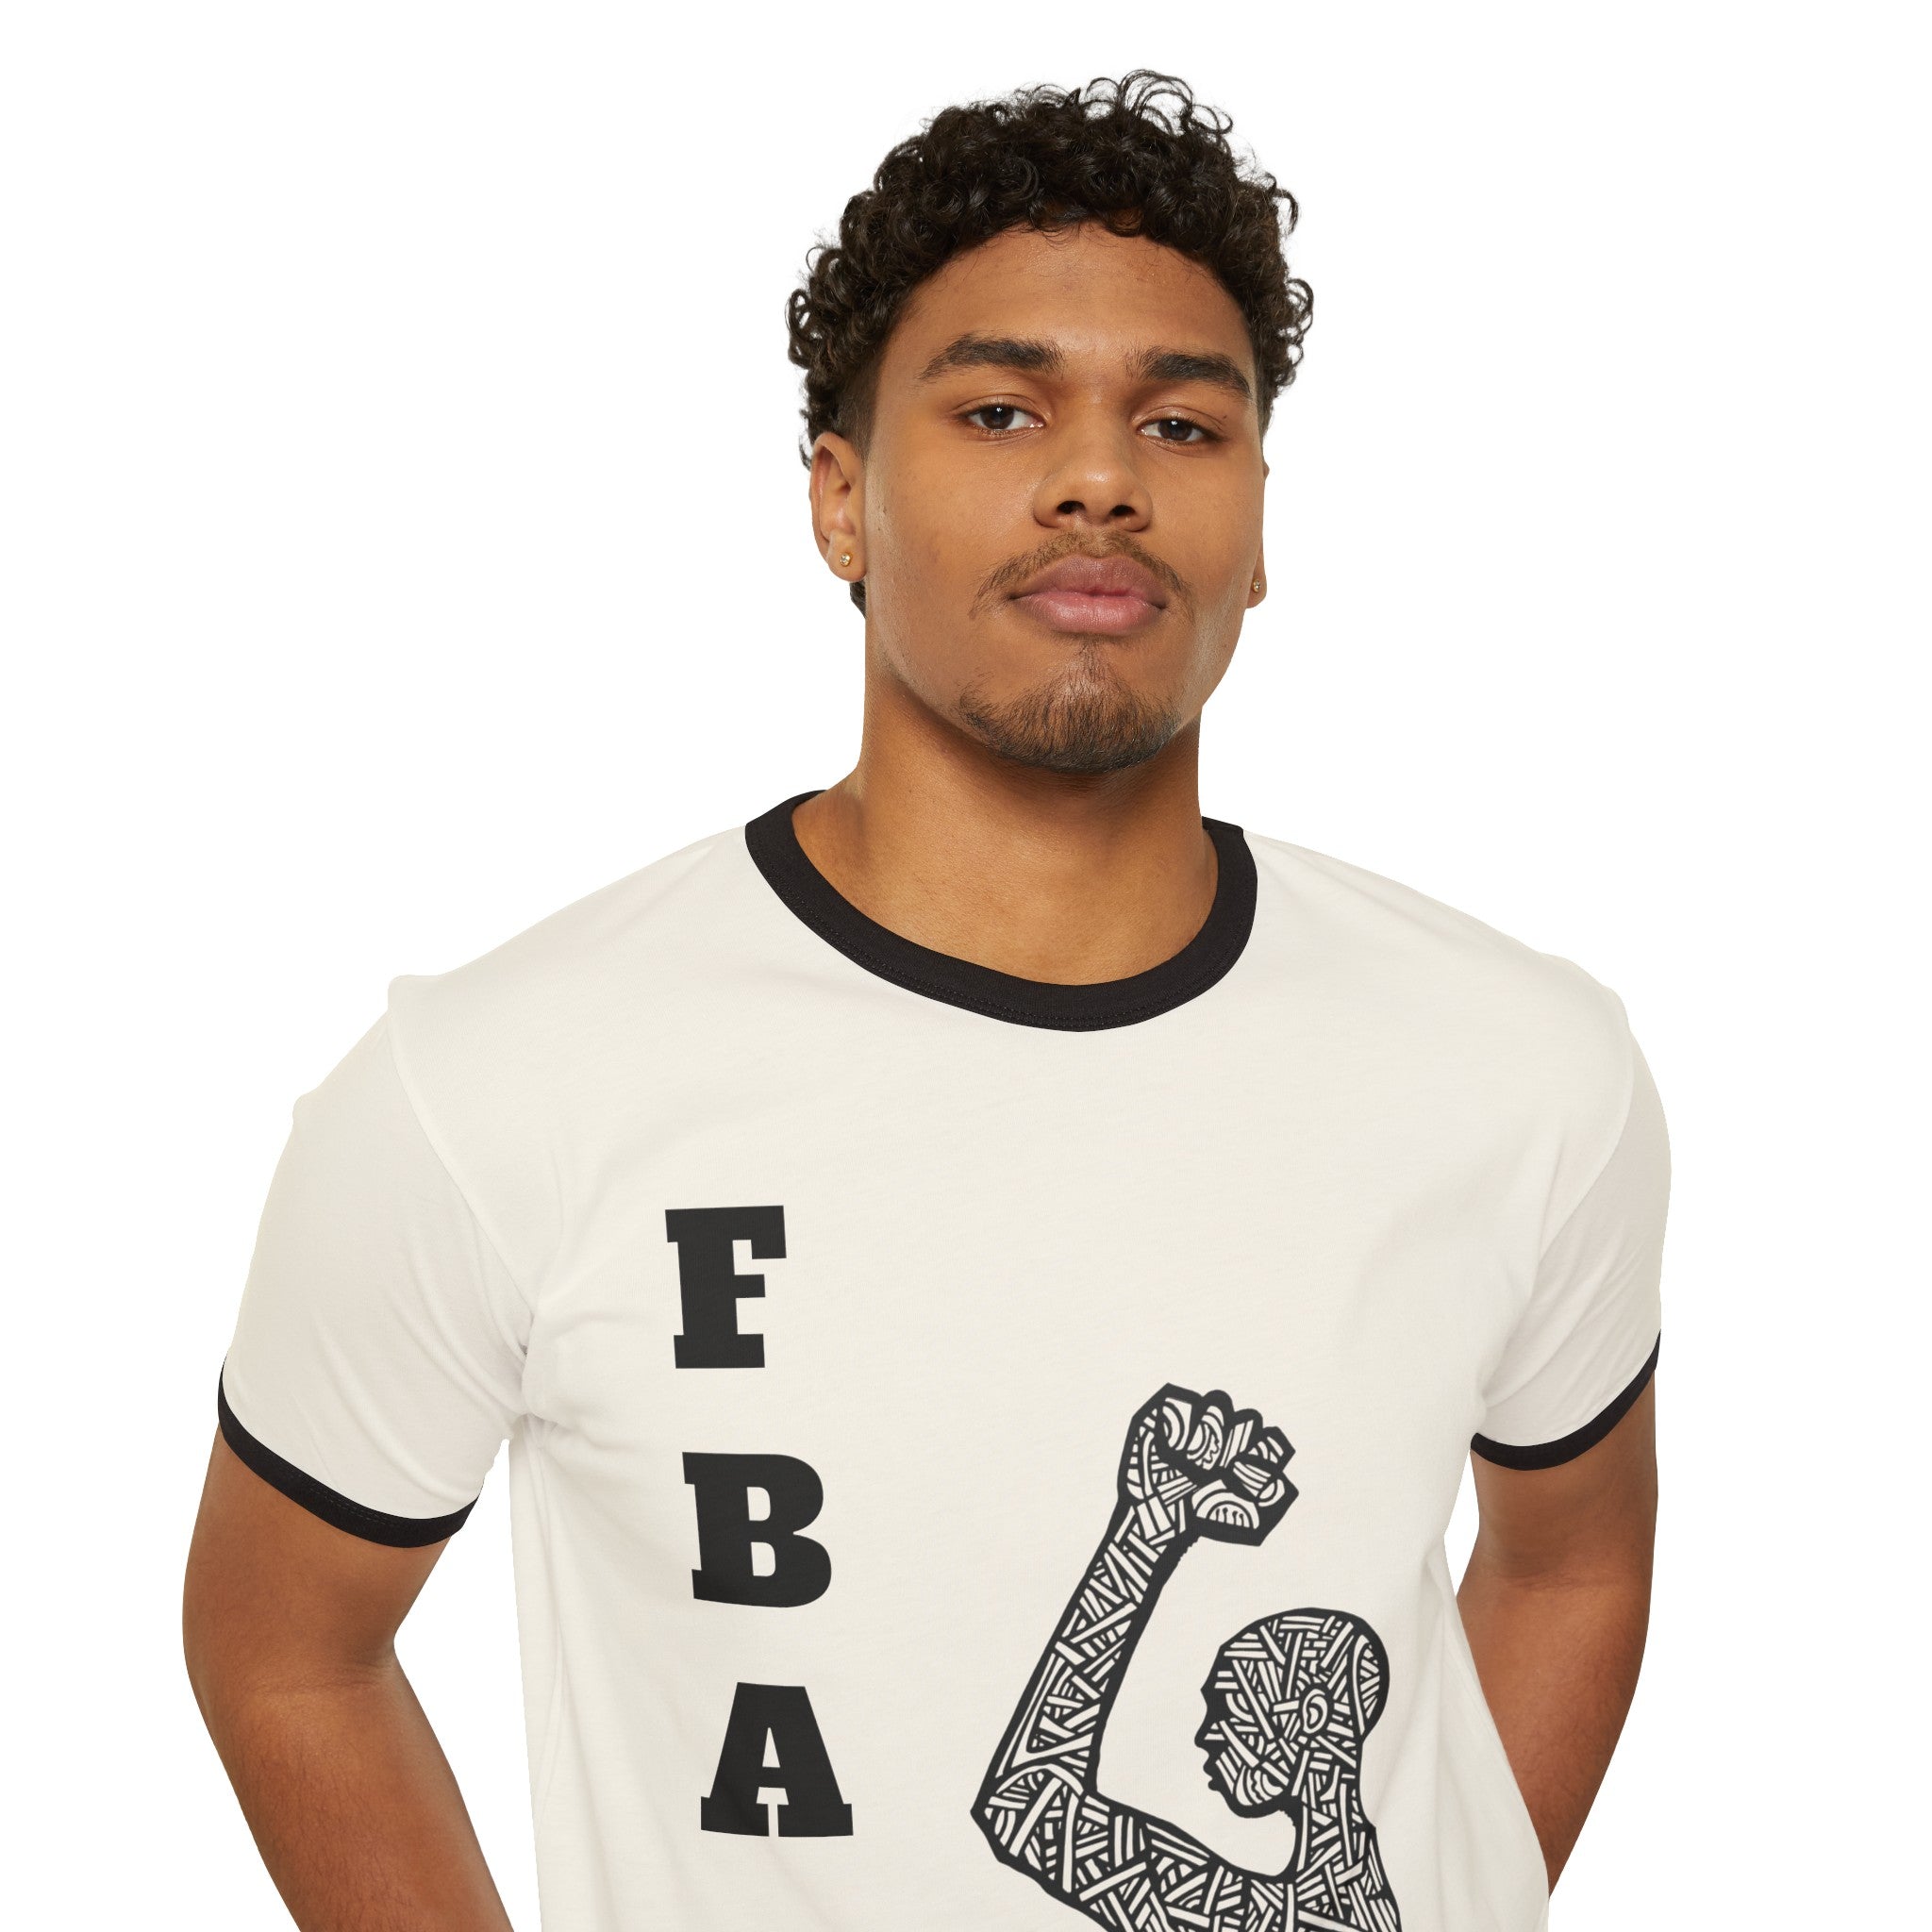 FBA Pride: Foundational Black American Heritage Unisex Cotton Ringer T-Shirt - Celebrate Your Roots